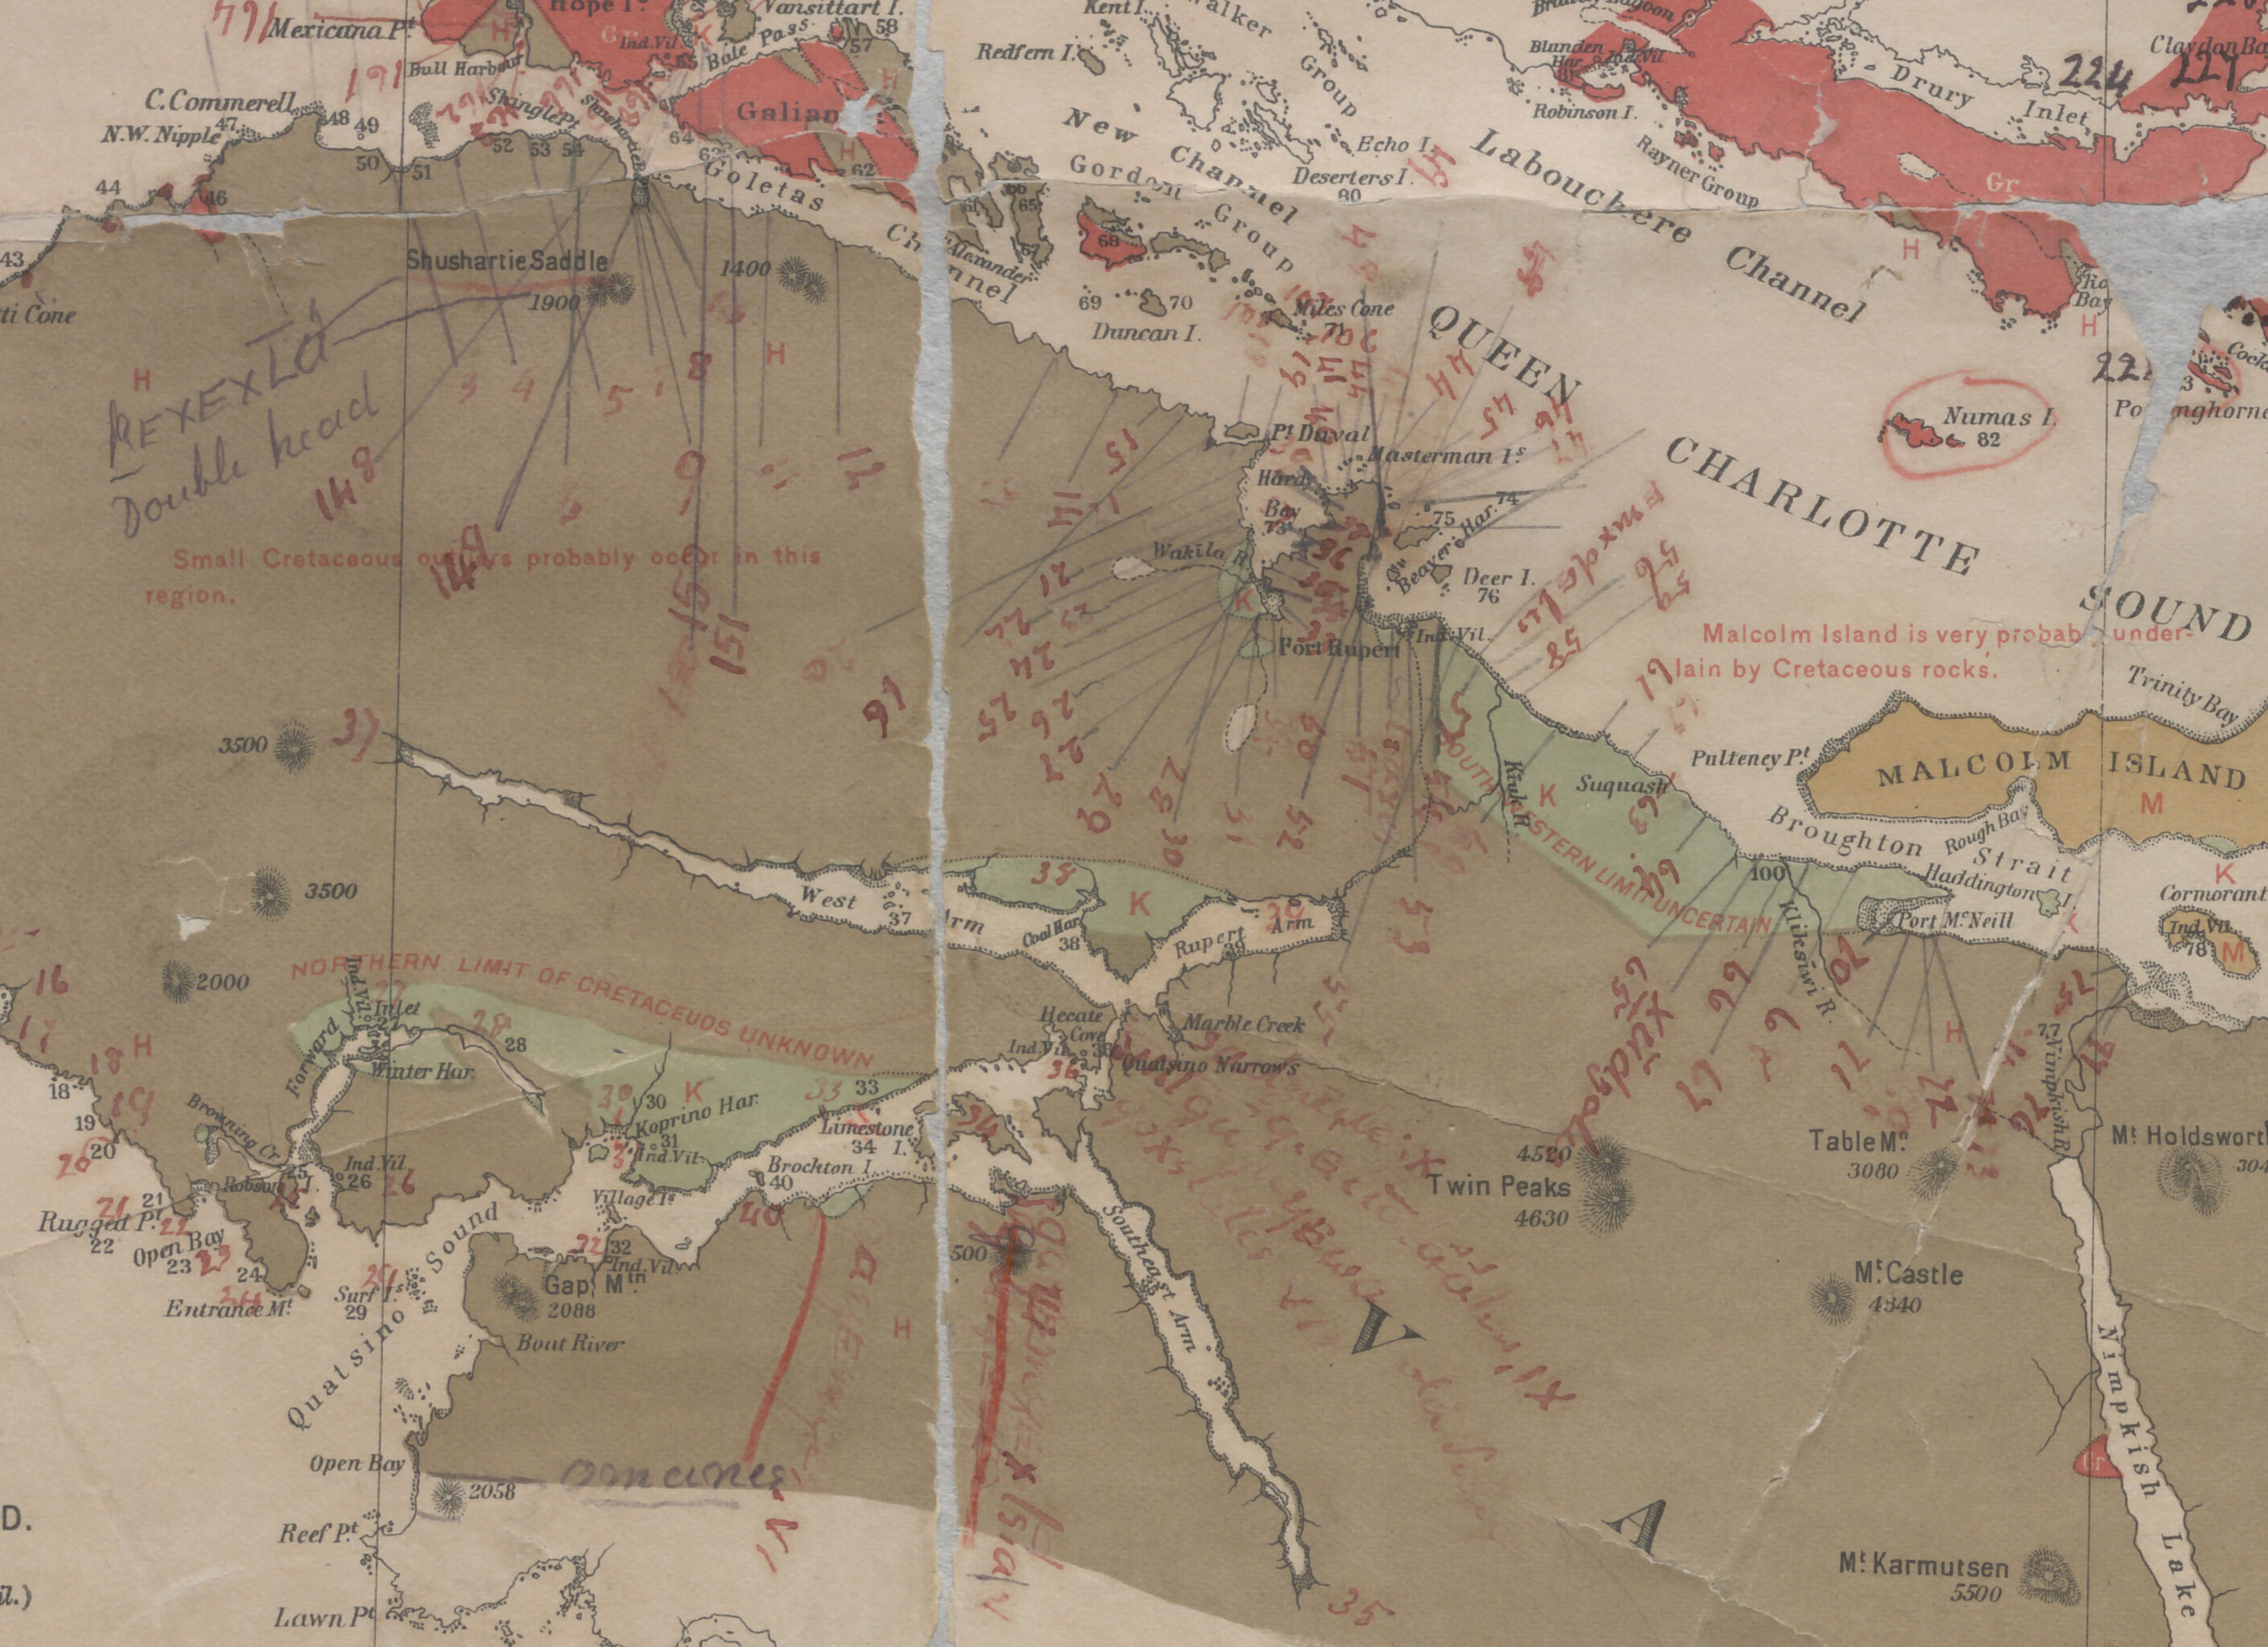 Detail of Dawson geological map of Vancouver Island region